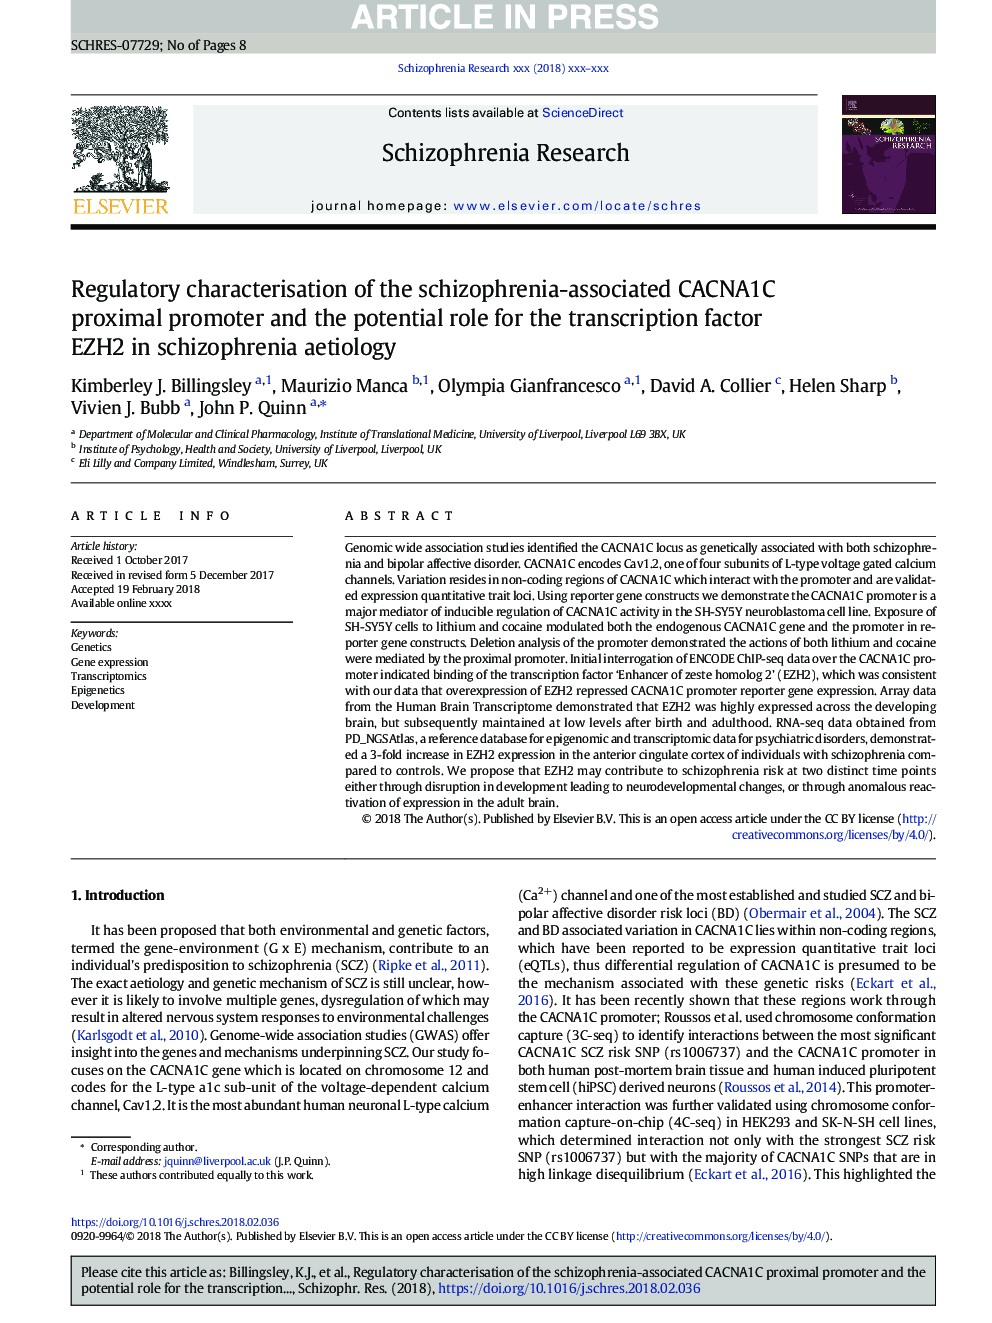 Regulatory characterisation of the schizophrenia-associated CACNA1C proximal promoter and the potential role for the transcription factor EZH2 in schizophrenia aetiology